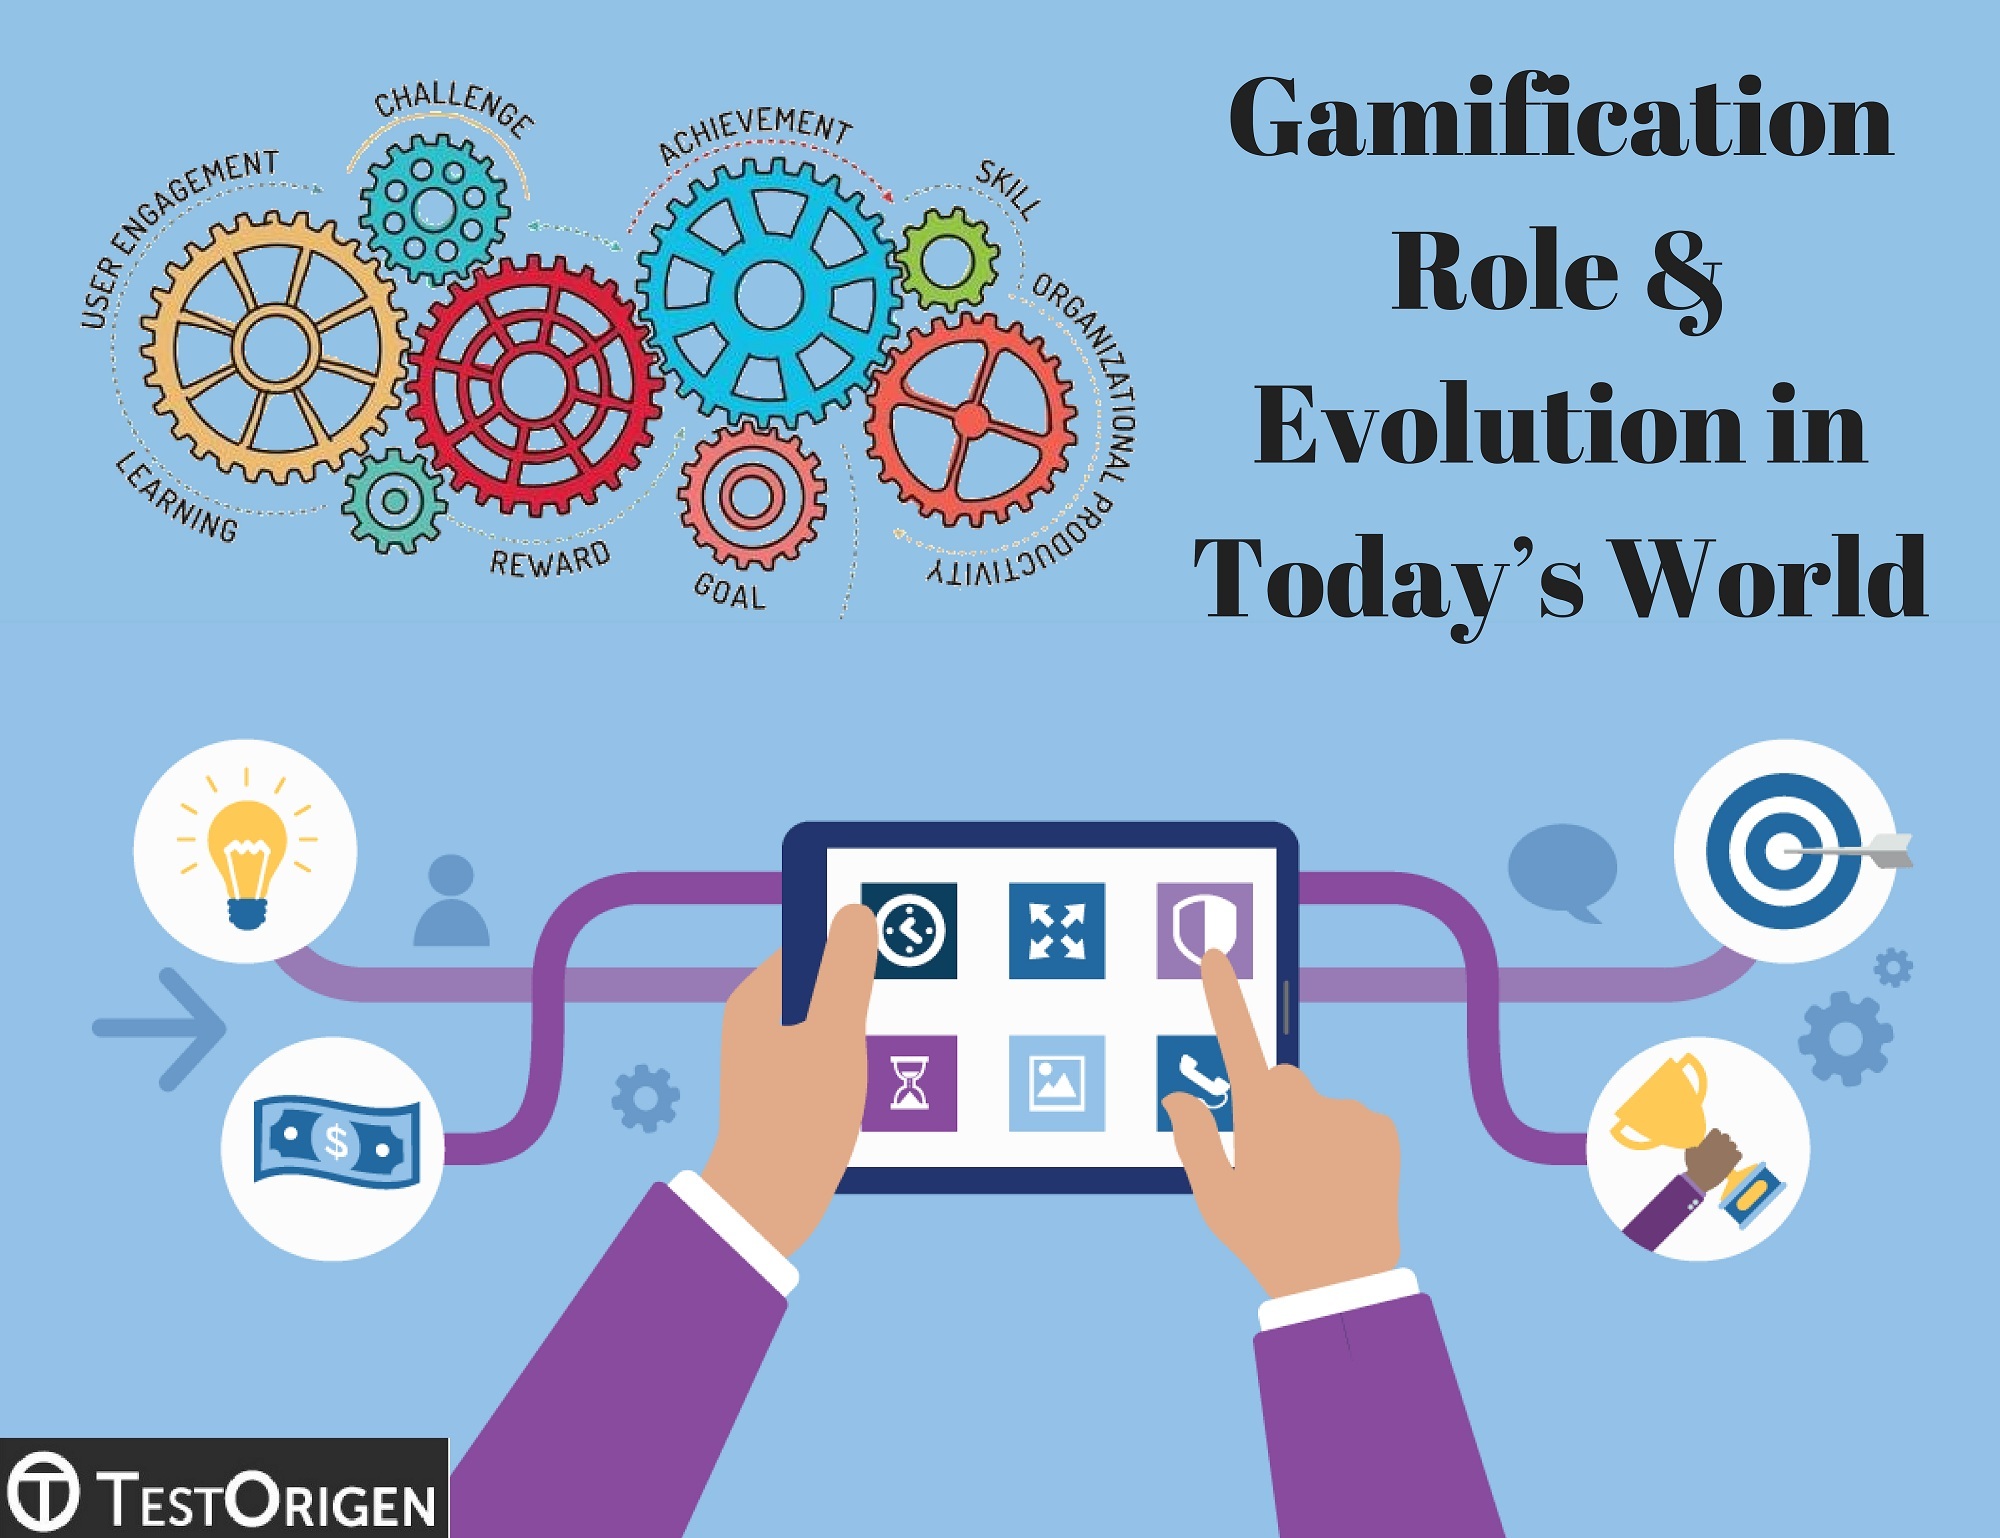 Gamification Role & Evolution in Today’s World